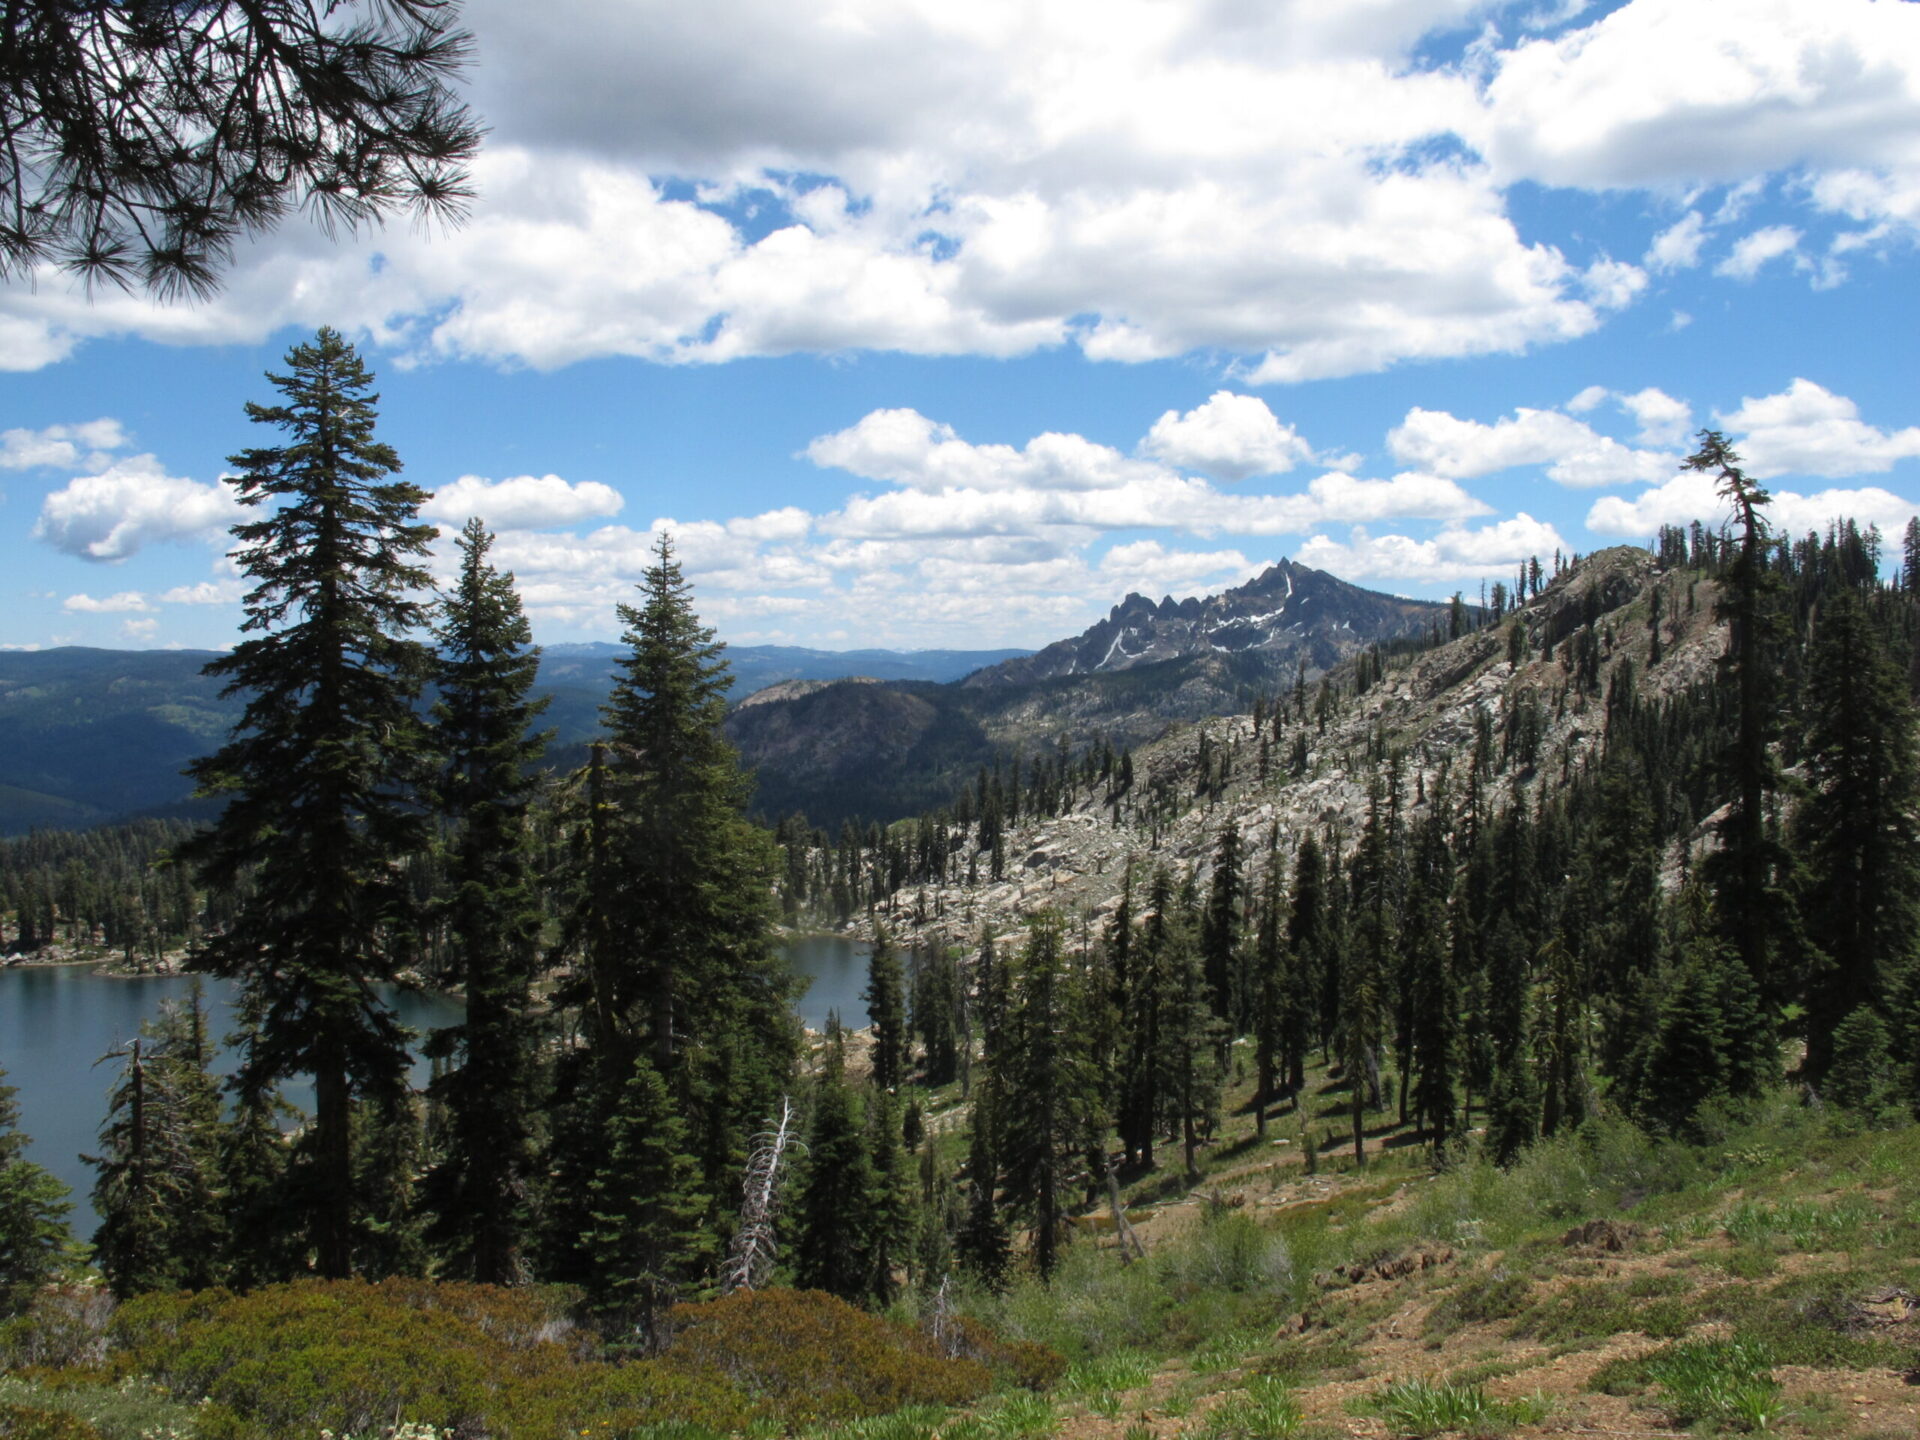 View of Sutter Buttes from the PCT, facing south (Photo by Hank Meals)